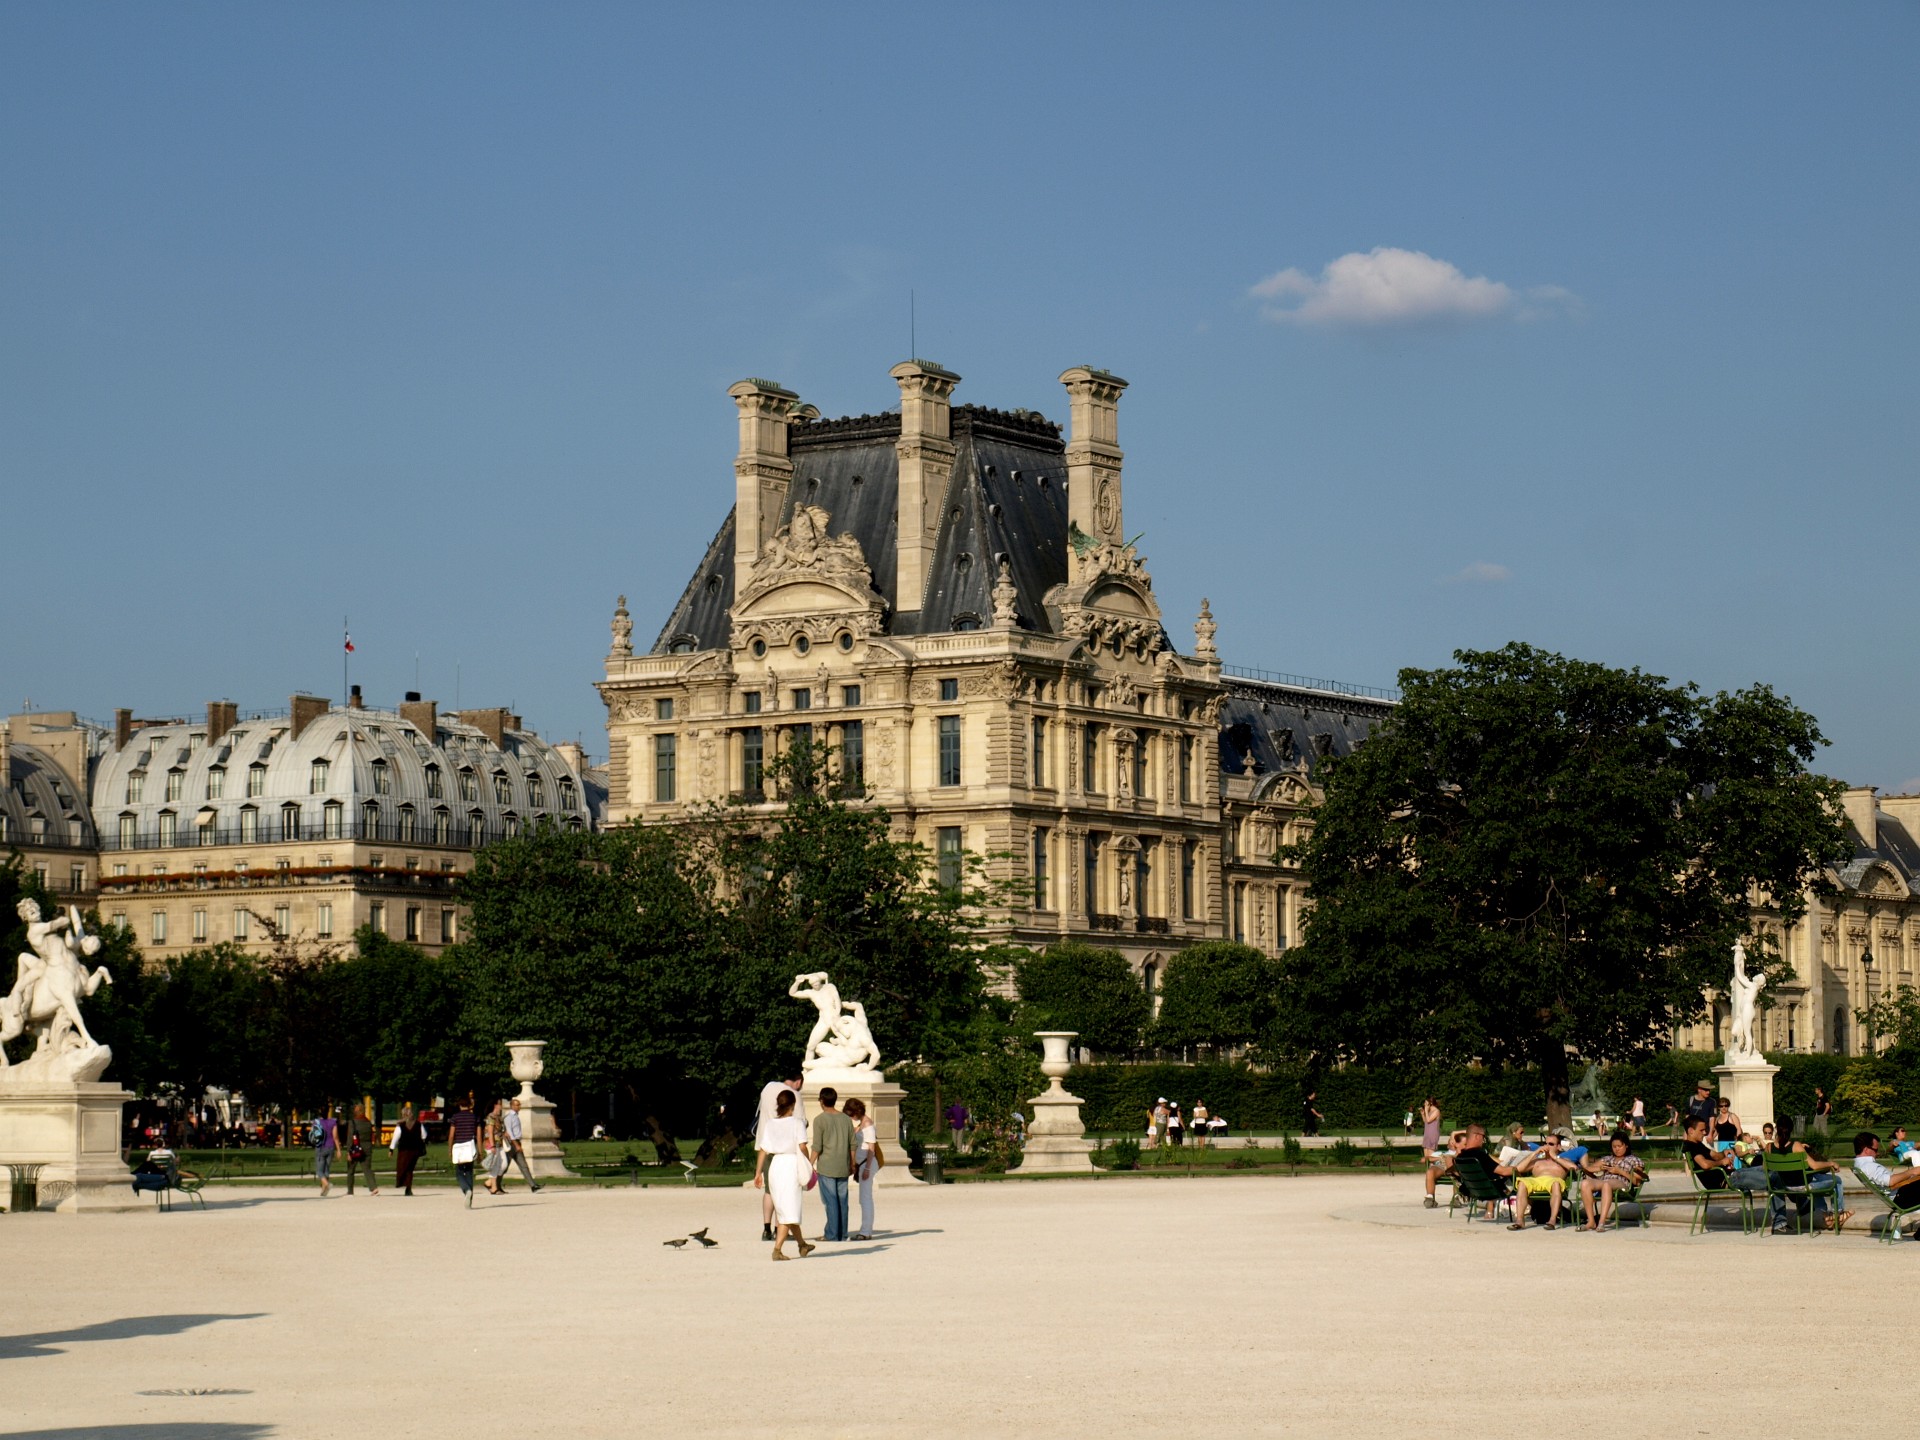 Approaching the Louvre from the Jardin des Tuileries